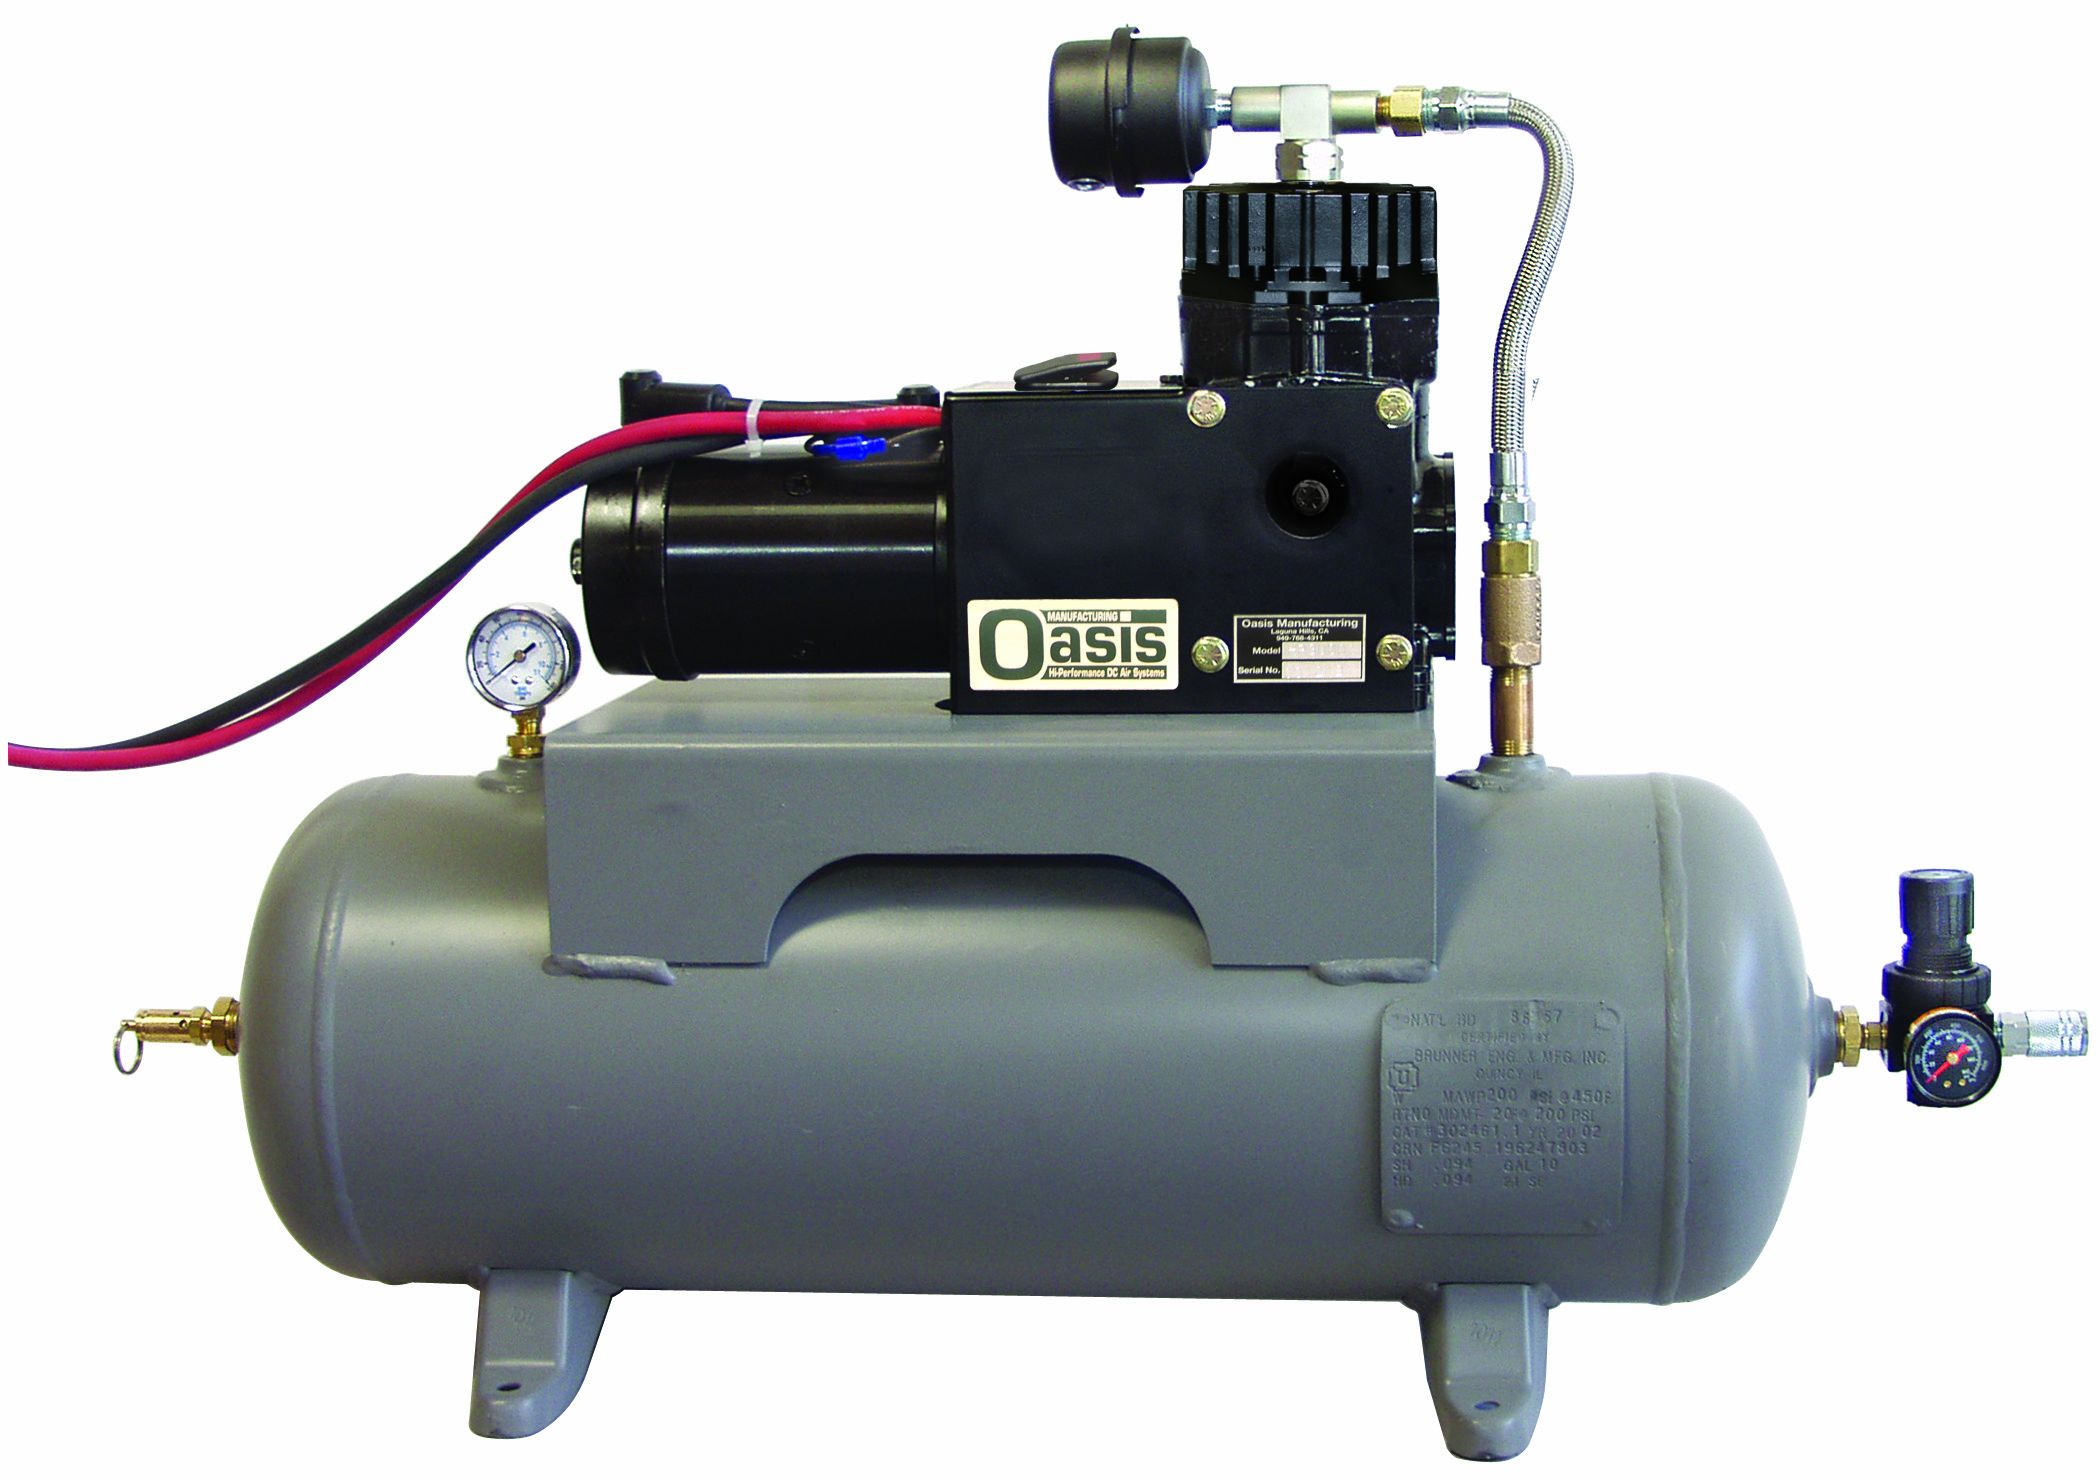 Item # XDT10-3000-12, Tank-Mounted Air Compressor On Oasis Manufacturing